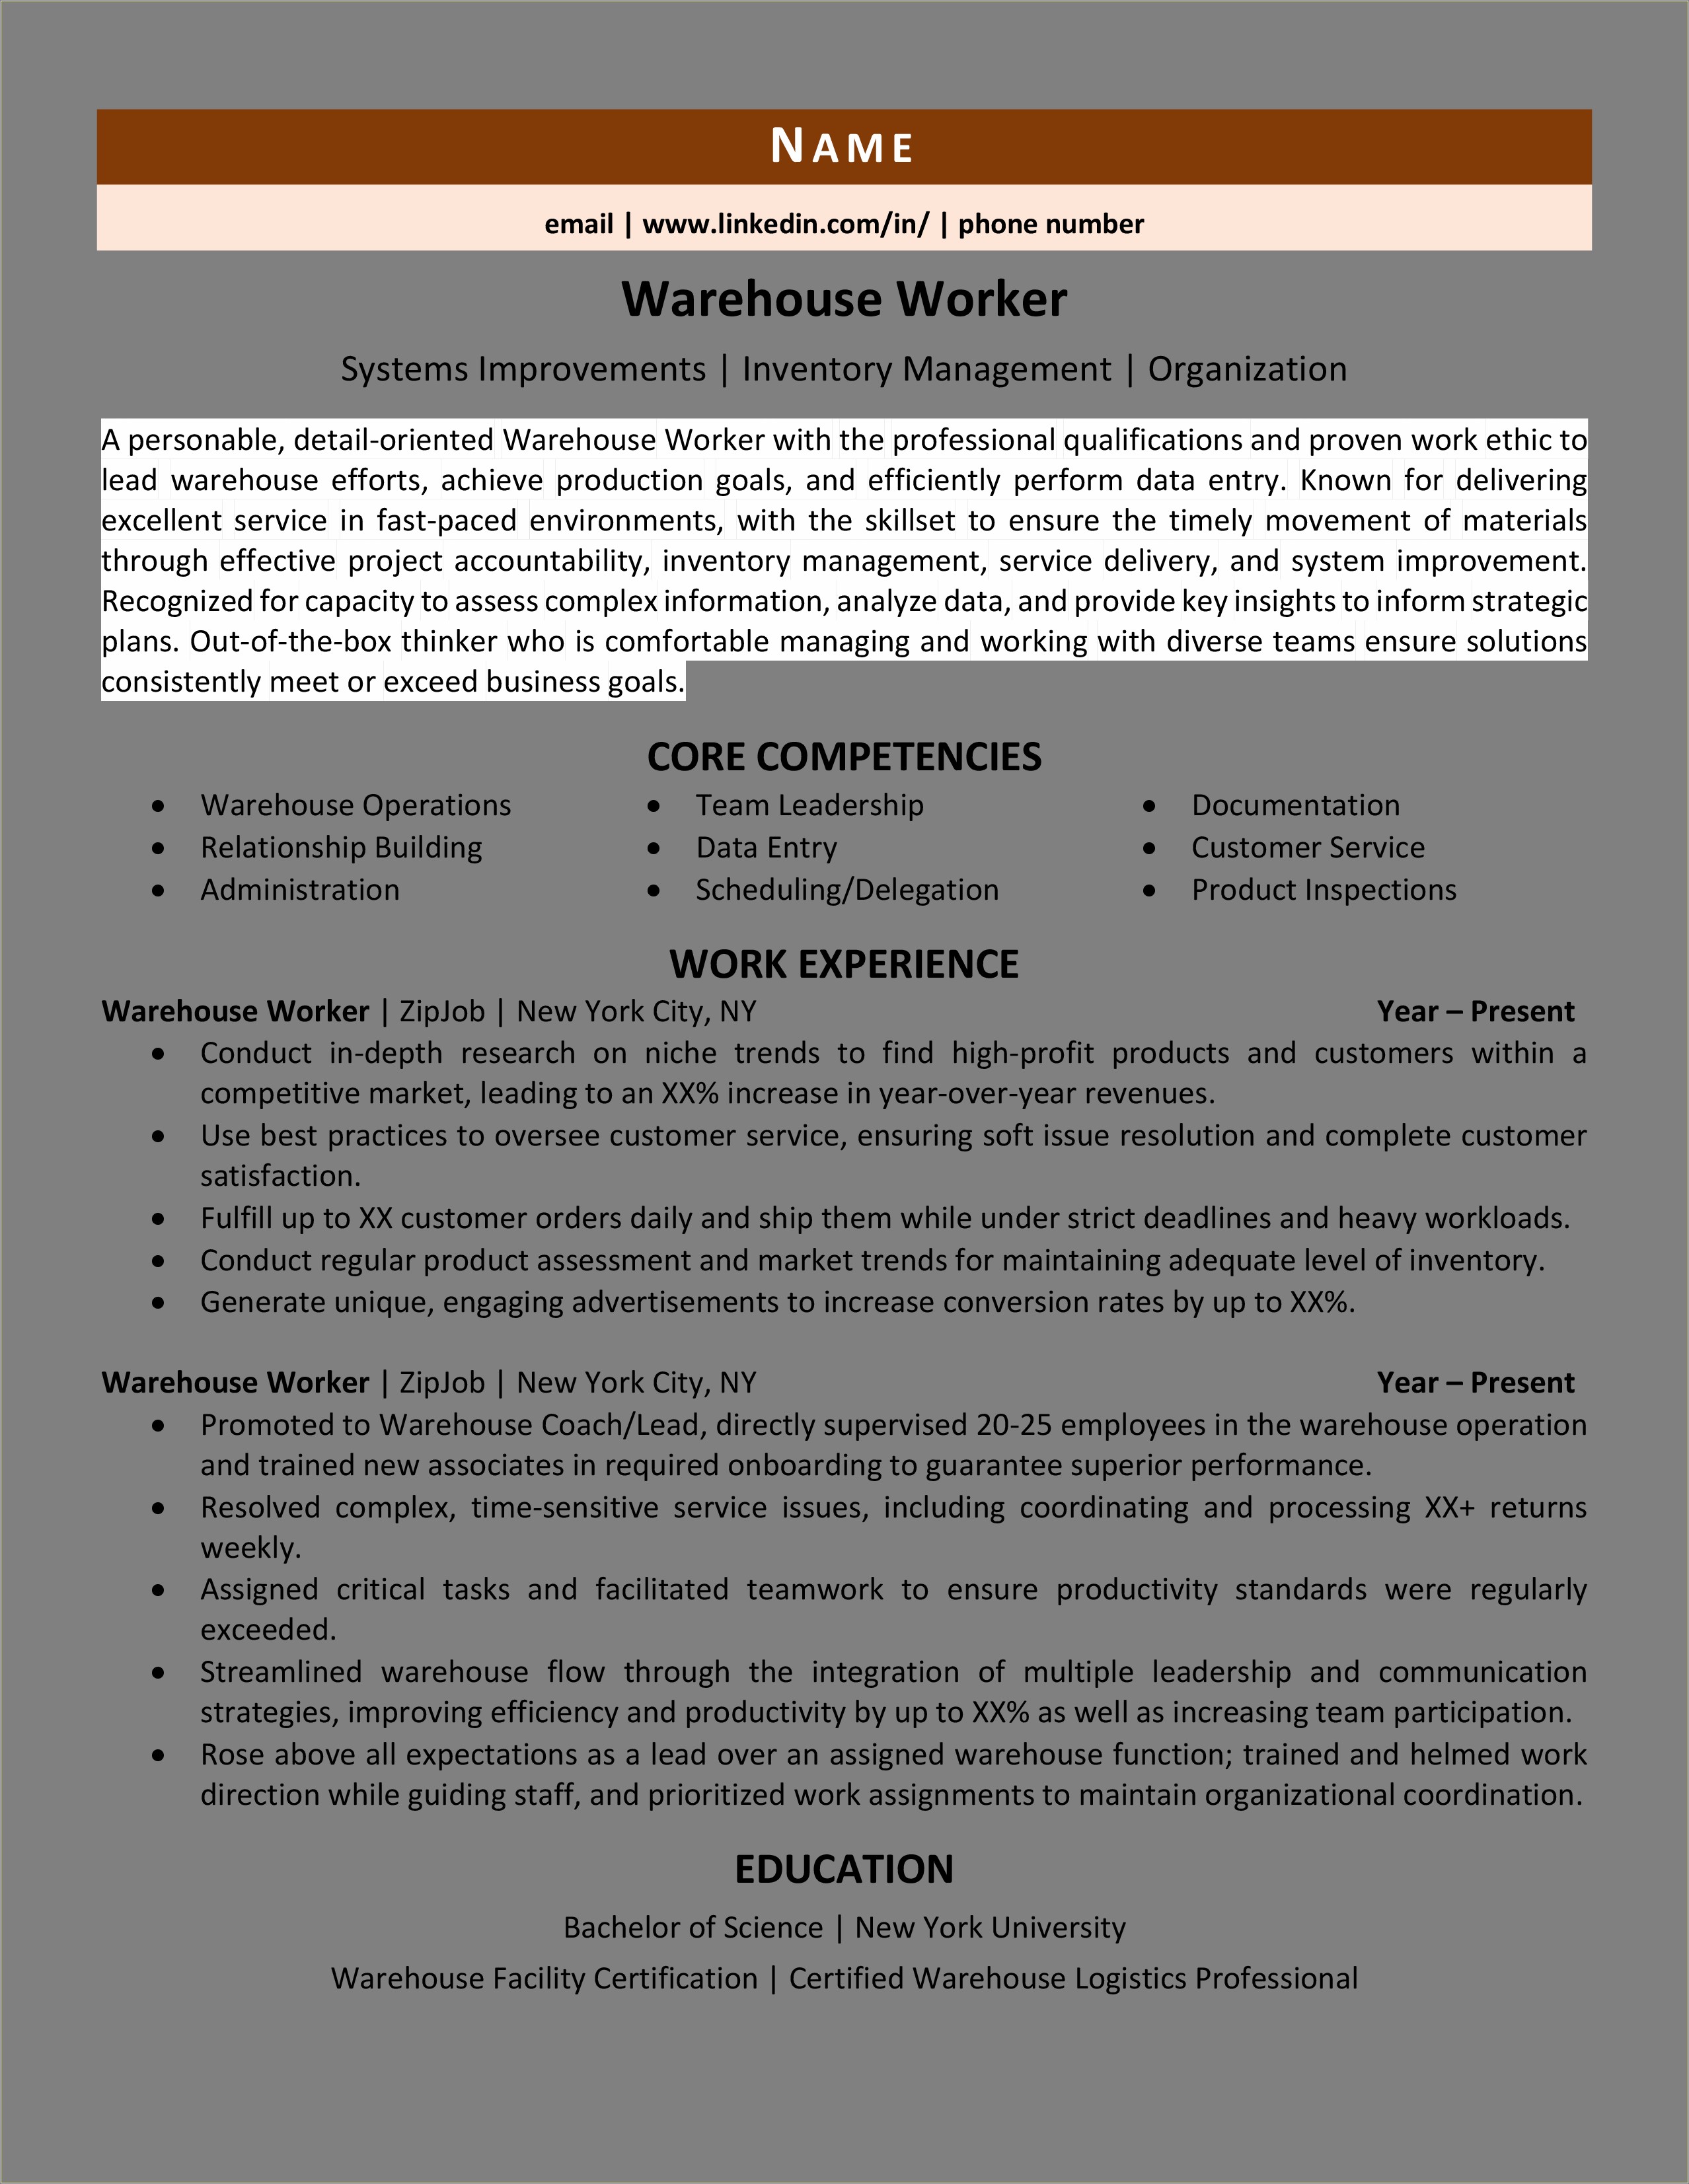 Warehouse Worker Bullet Points For Resume